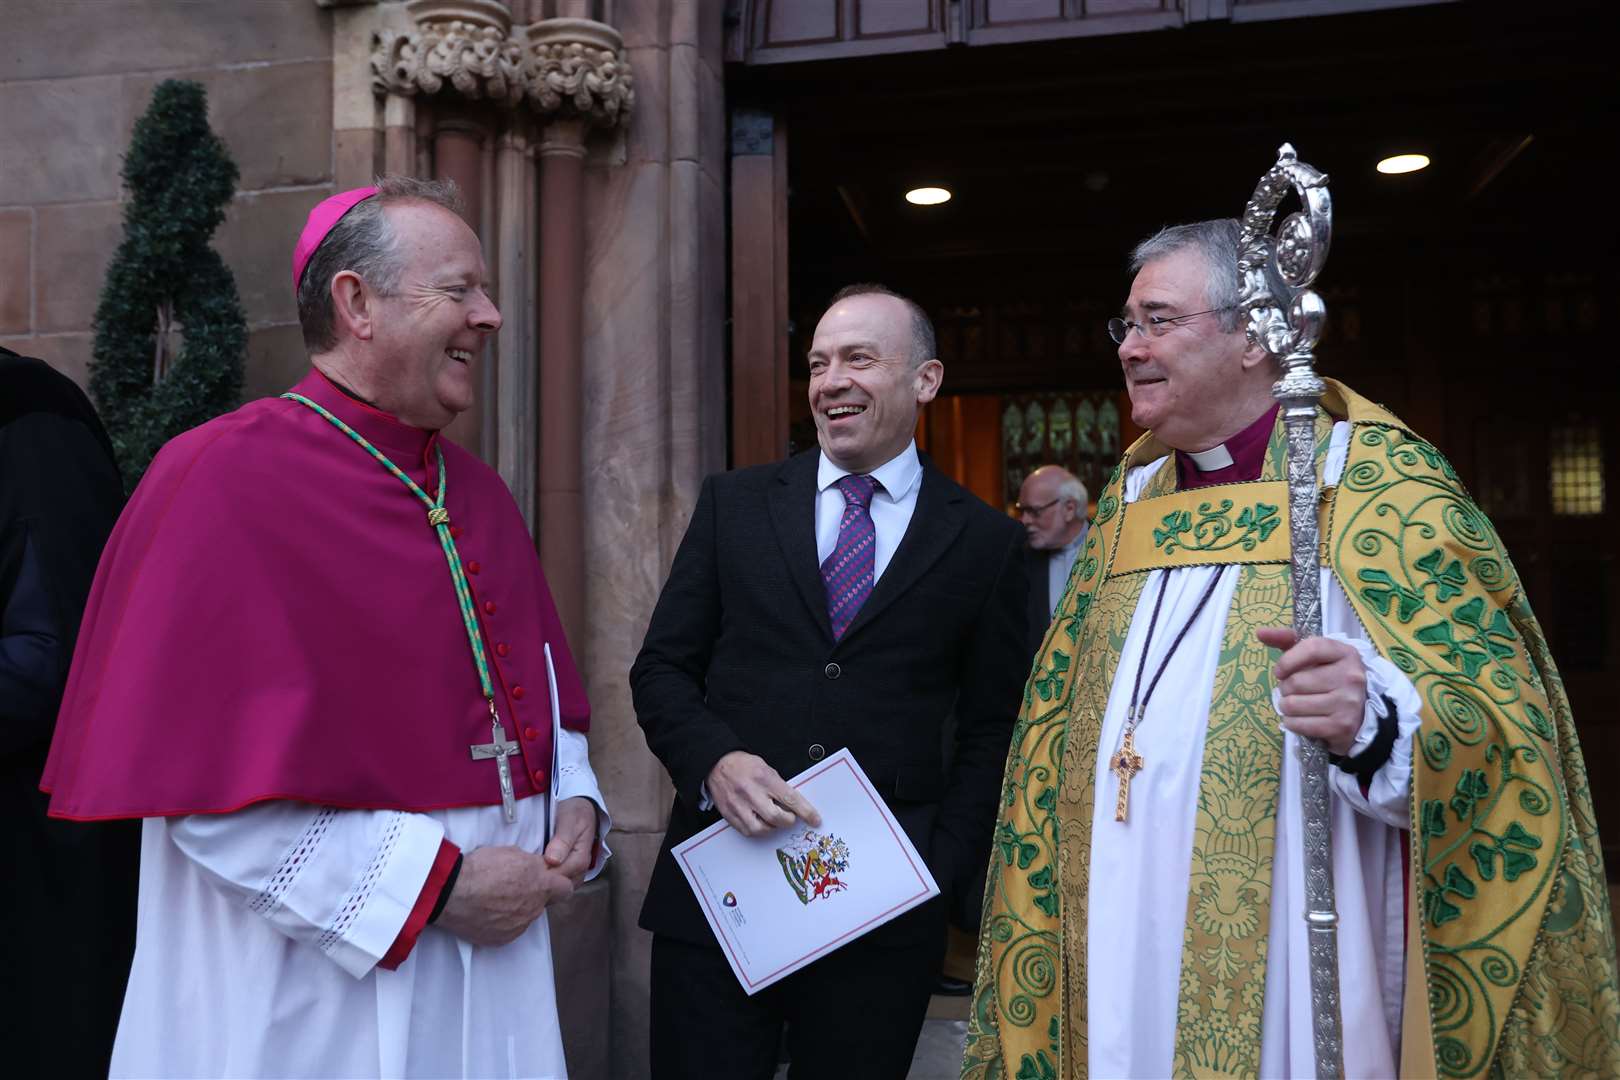 Archbishop Eamon Martin and Archbishop of Armagh, the Most Revd John McDowell, with Northern Ireland Secretary Chris Heaton-Harris at the end of a Service of Thanksgiving in preparation for the Coronation of King Charles III at St Patrick’s Cathedral, Armagh. (Liam McBurney/PA)